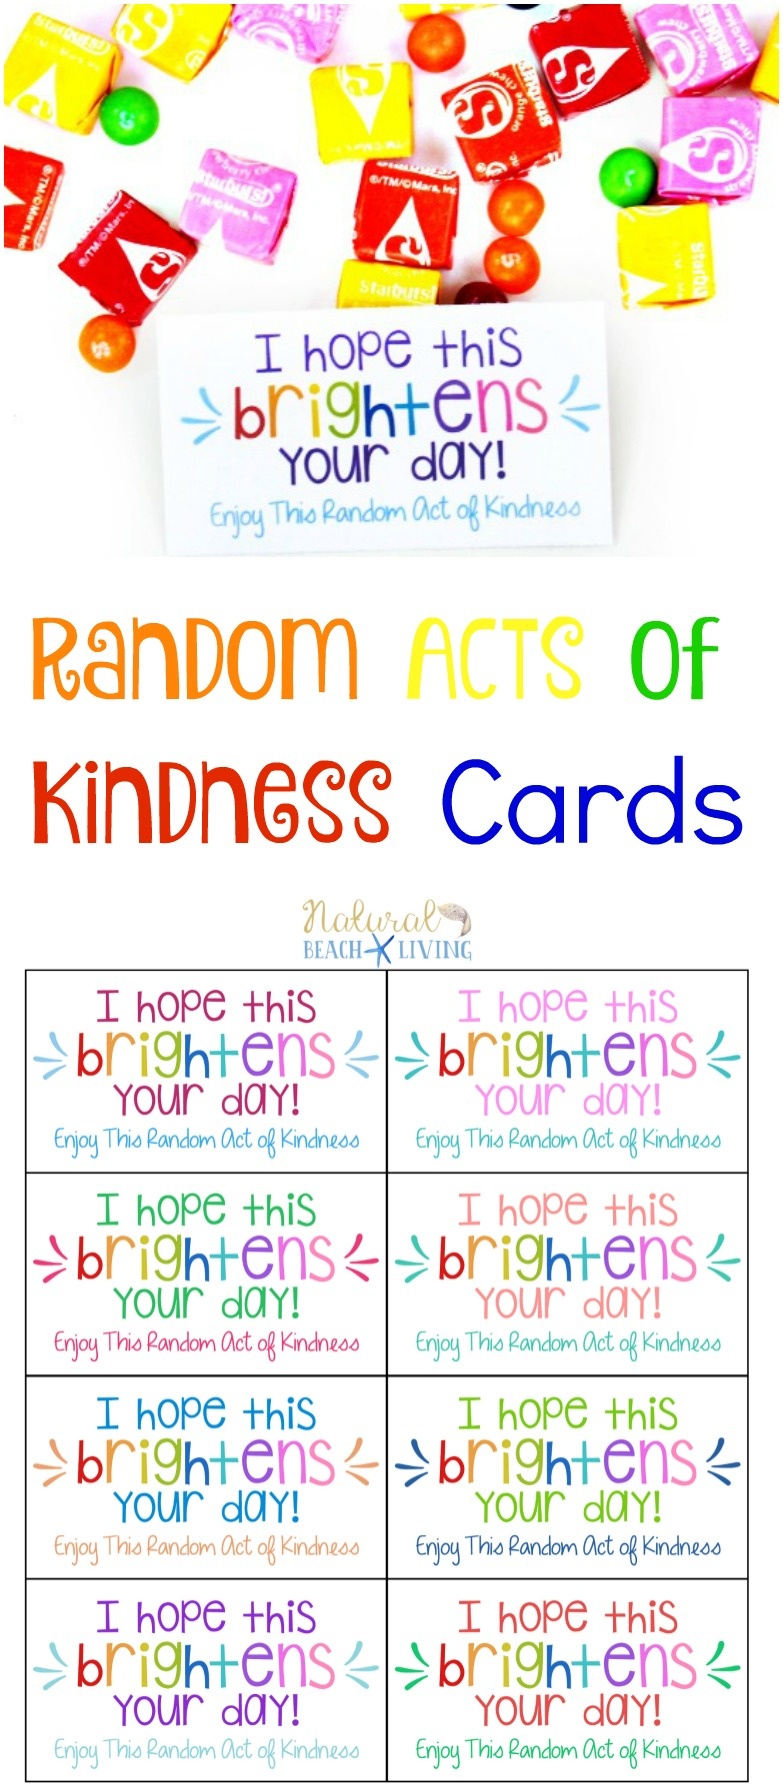 The Best Random Acts Of Kindness Printable Cards Free - Natural - Free Printable Kindness Cards